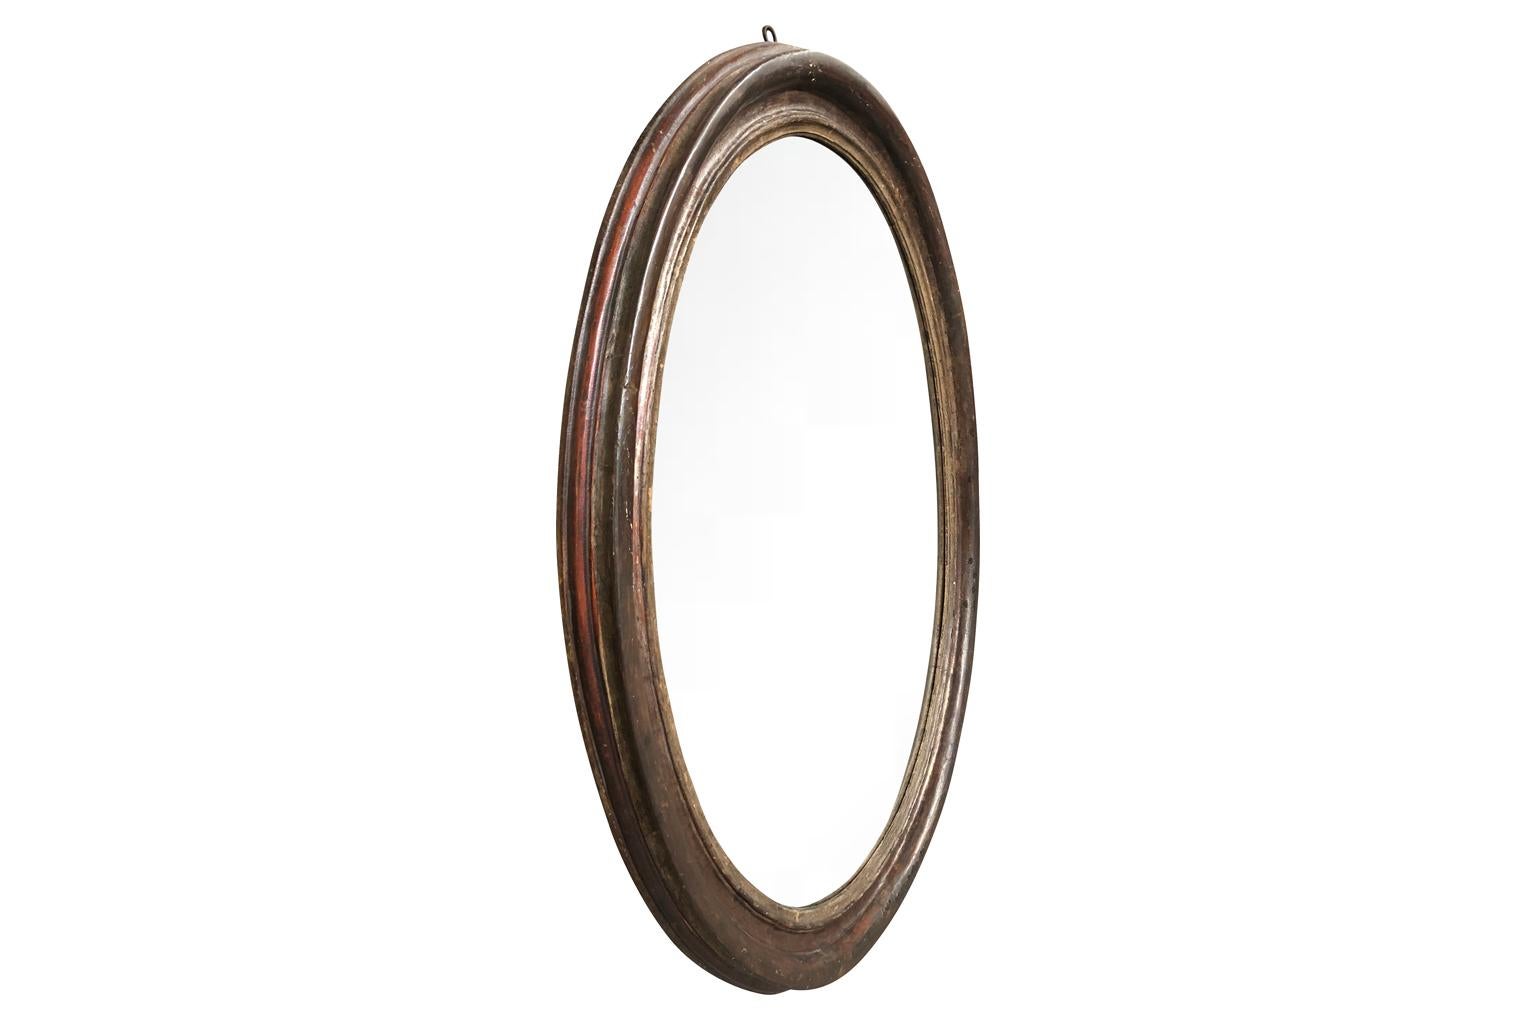 A very stunning 18th century oval shaped frame now as mirror from the Veneto region of Italy in polychromed wood. Beautiful color and patina.